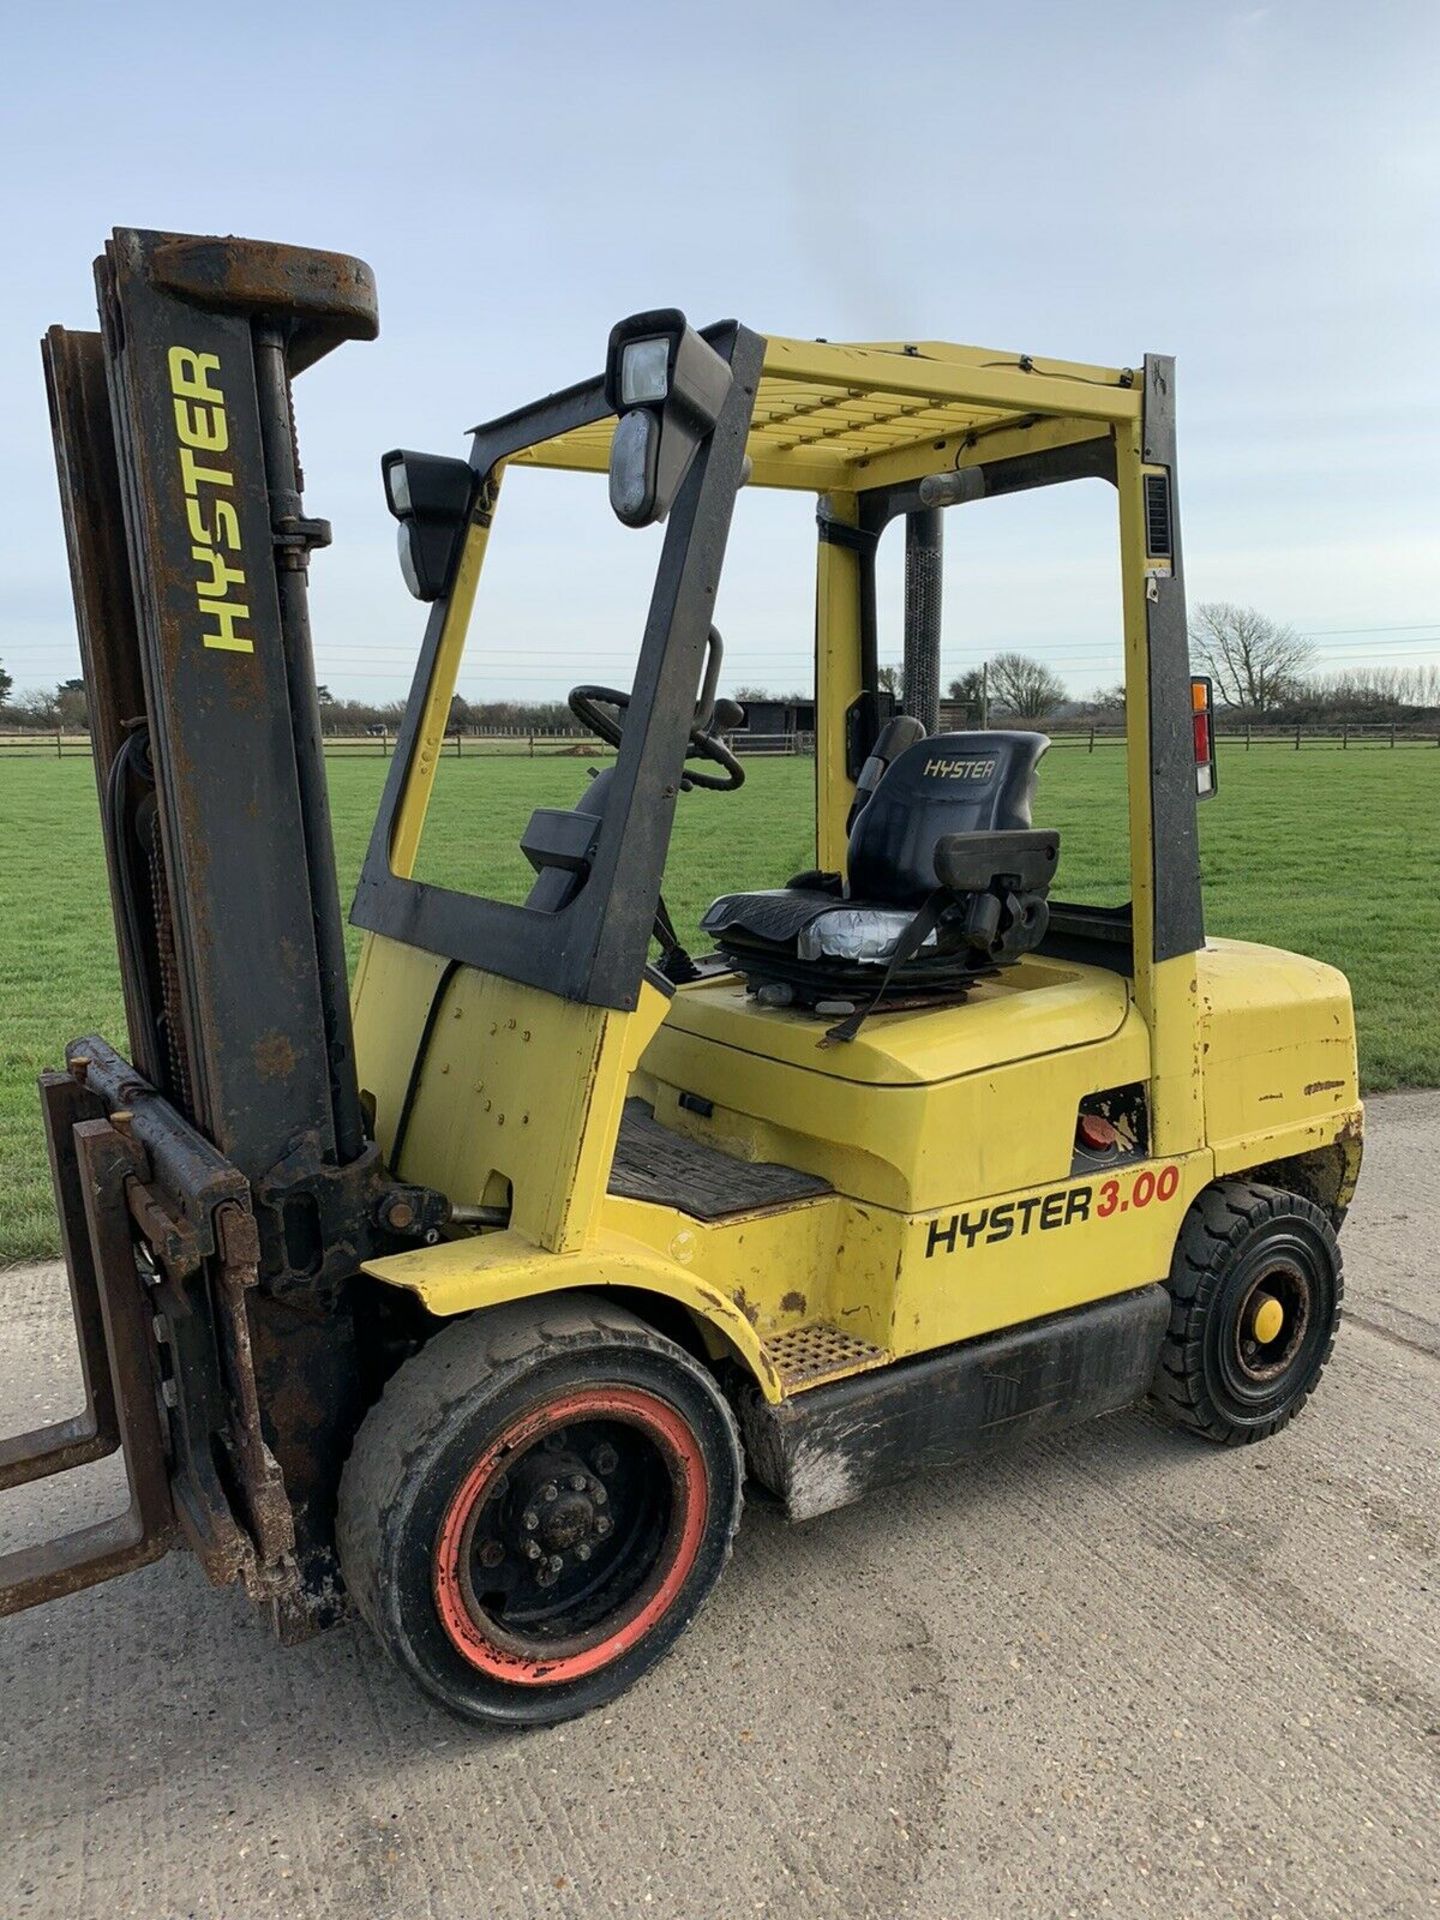 Hyster 3 Tonne Diesel Forklift 4.7 Container Spec - Image 2 of 6